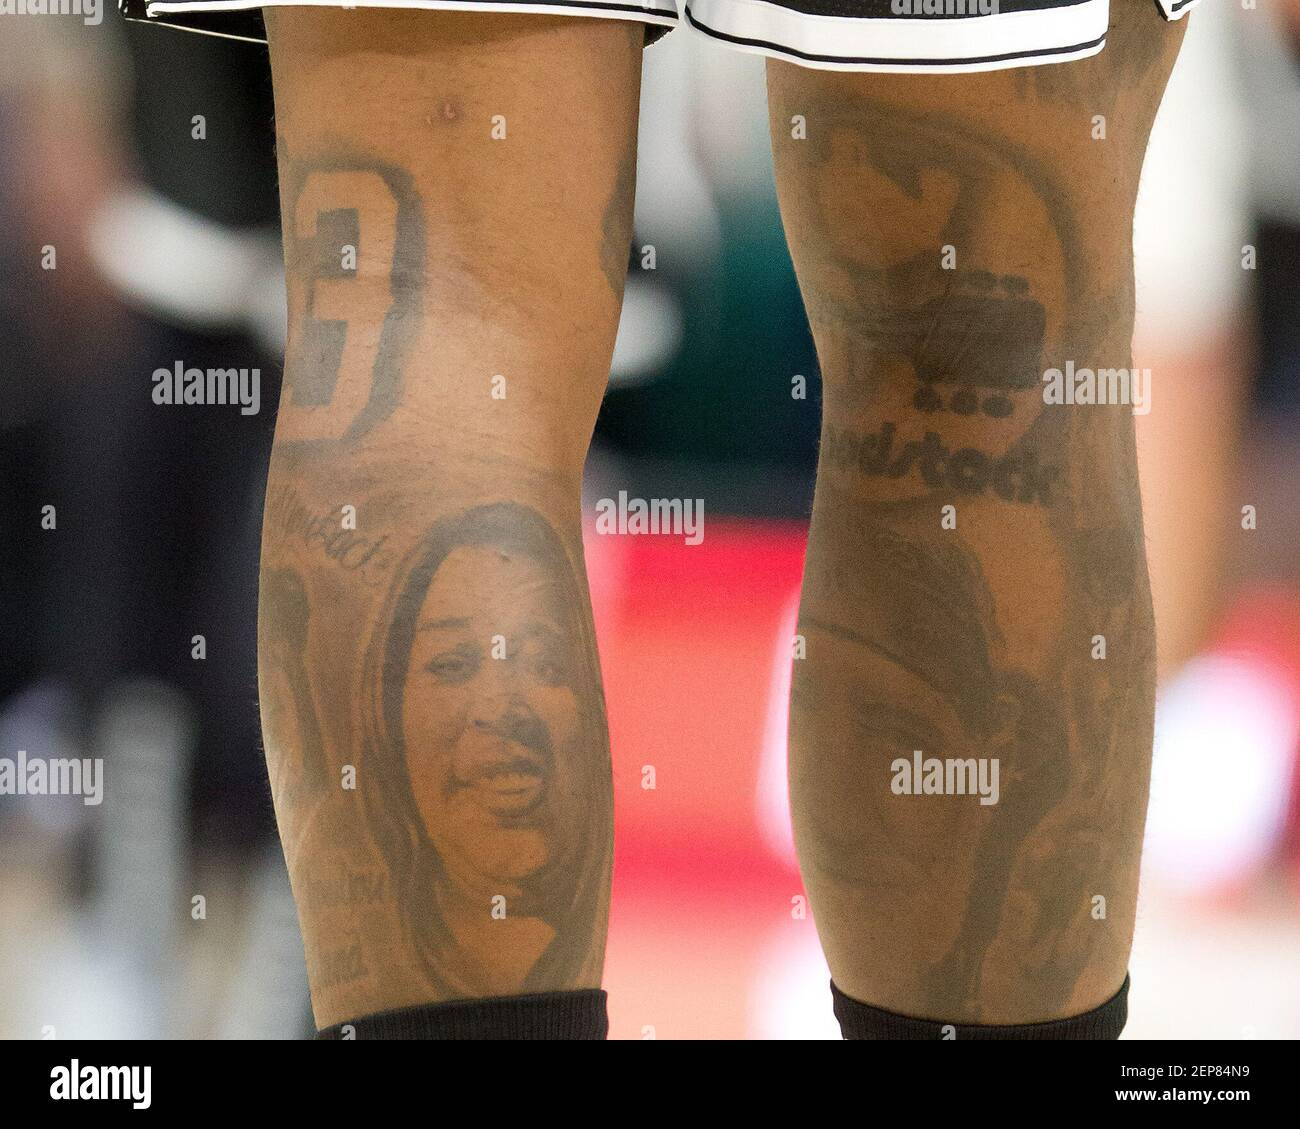 Nov 12, 2019; Salt Lake City, UT, USA; A detailed view of tattoos on the legs of Brooklyn Nets DeAndre Jordan (6) during the first half against the Utah Jazz